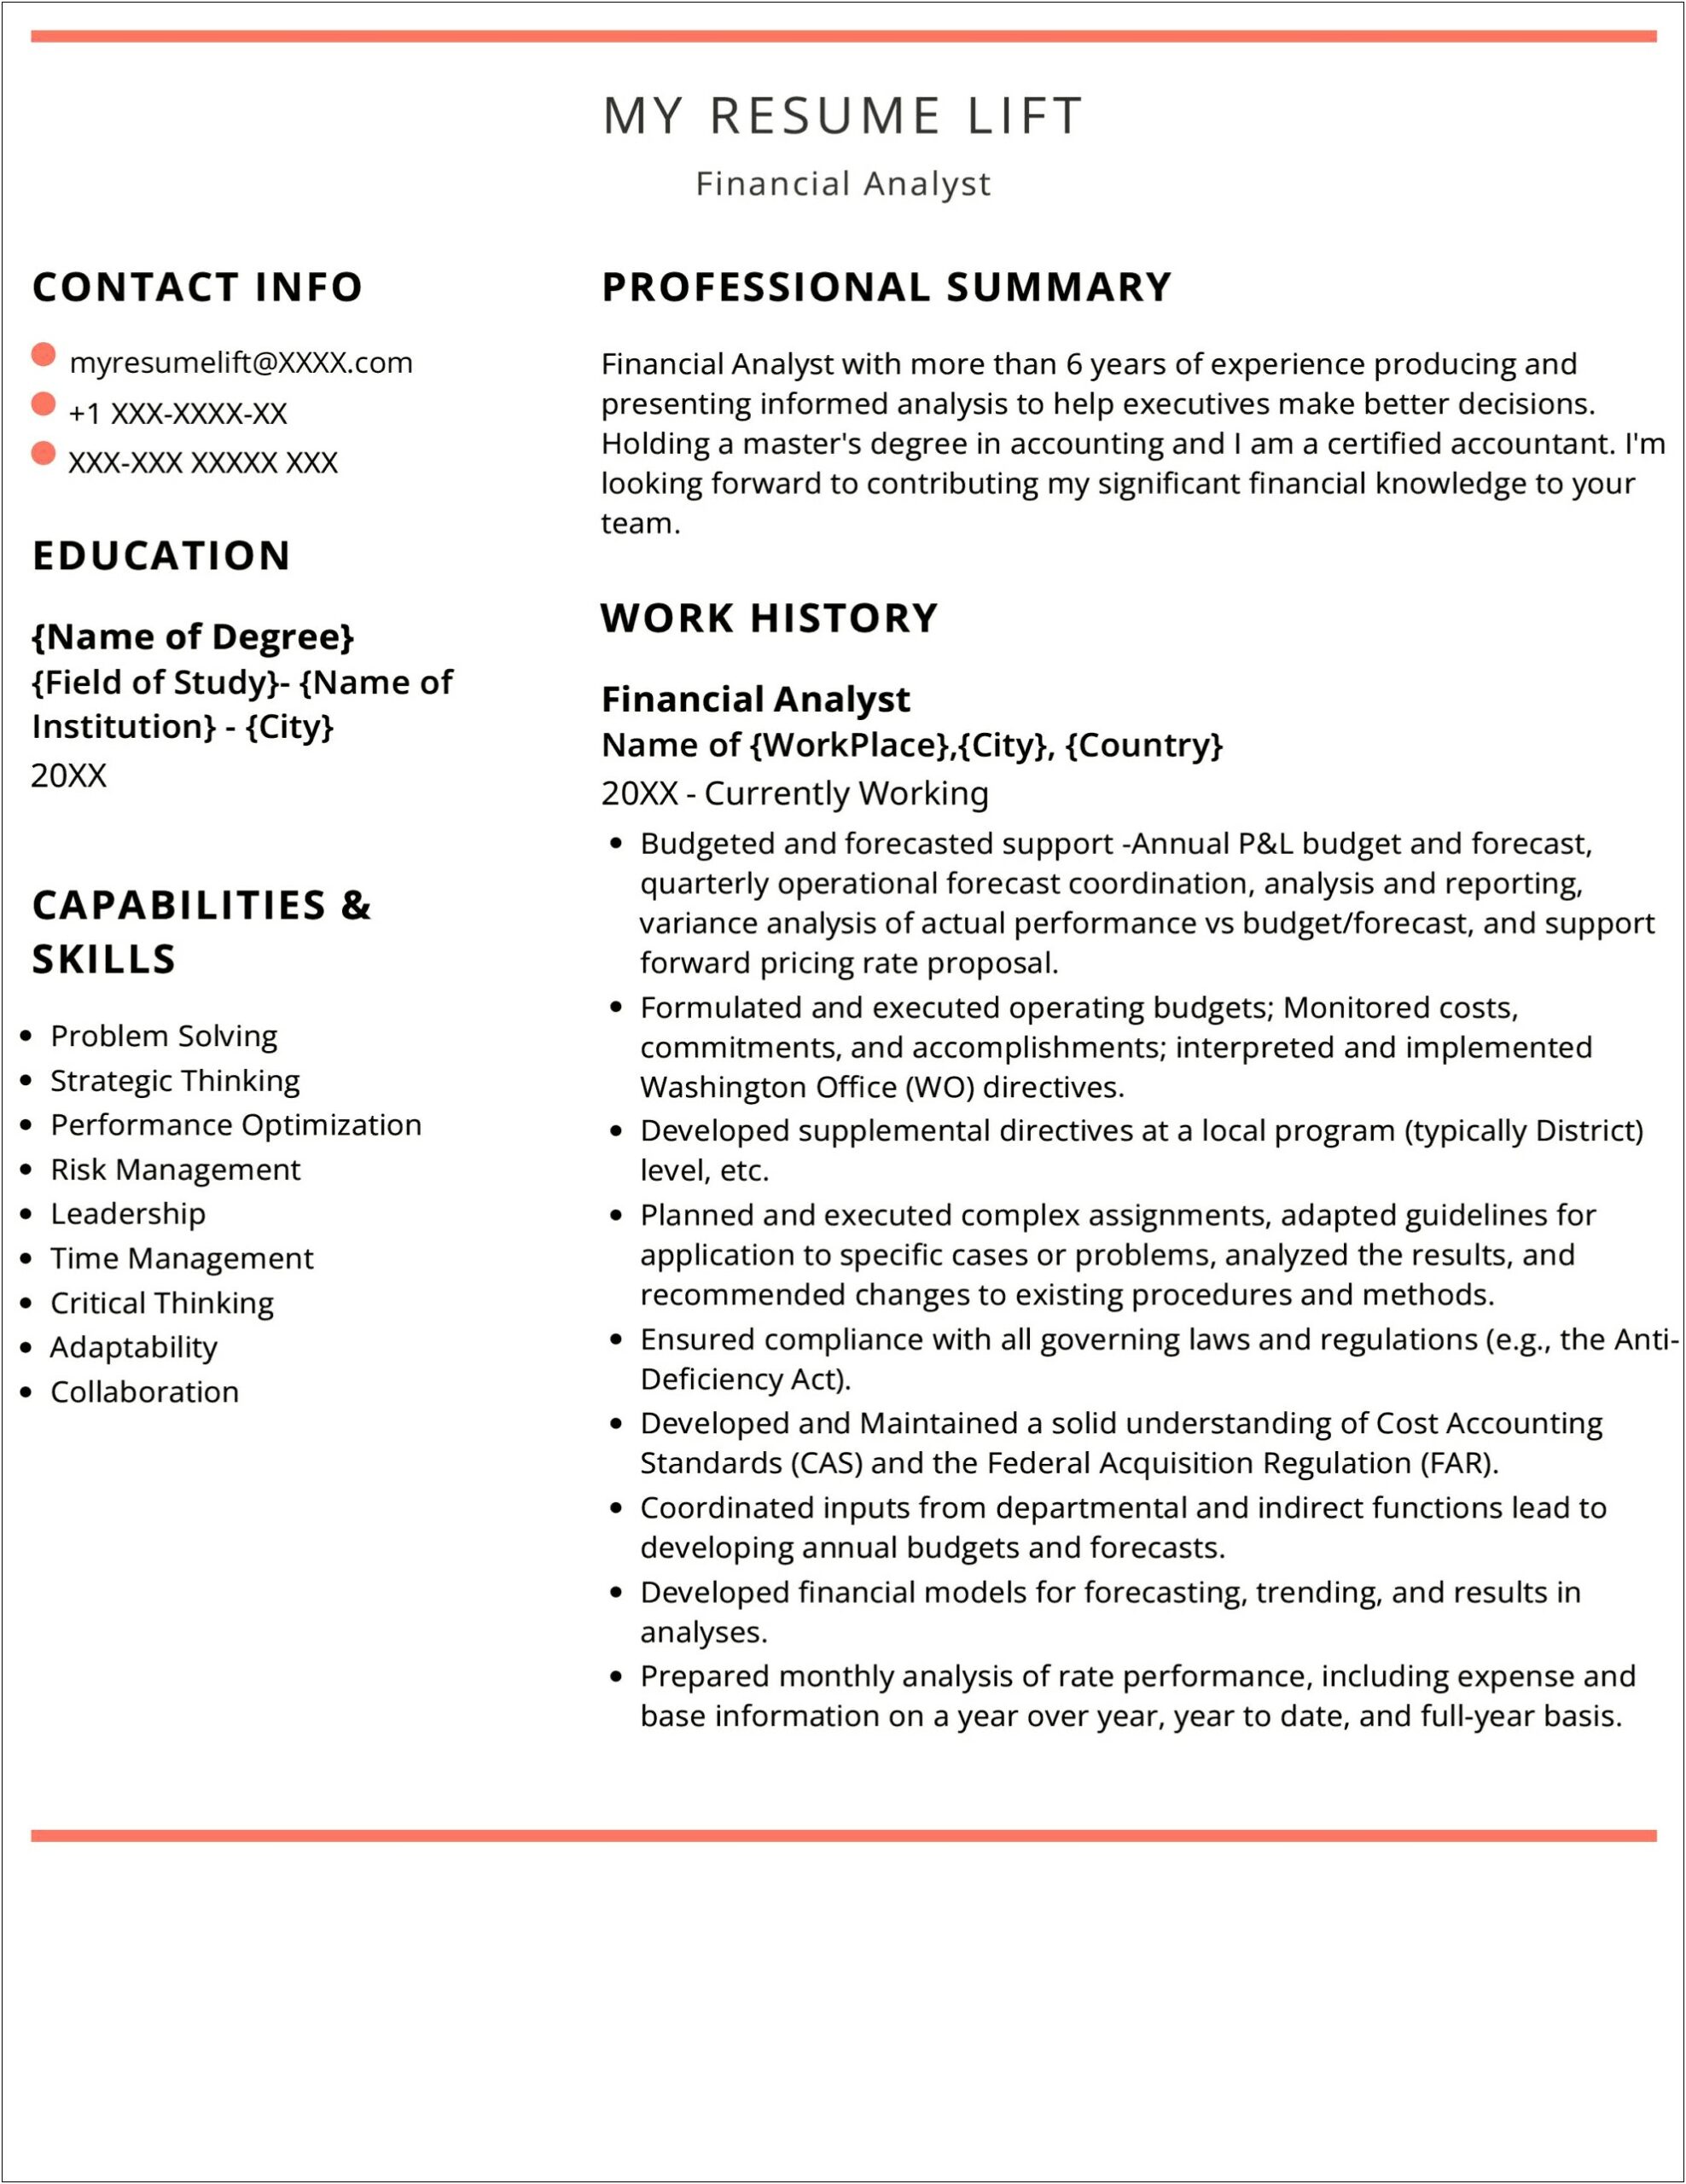 Examples Of Adaptability In The Workplace For Resume